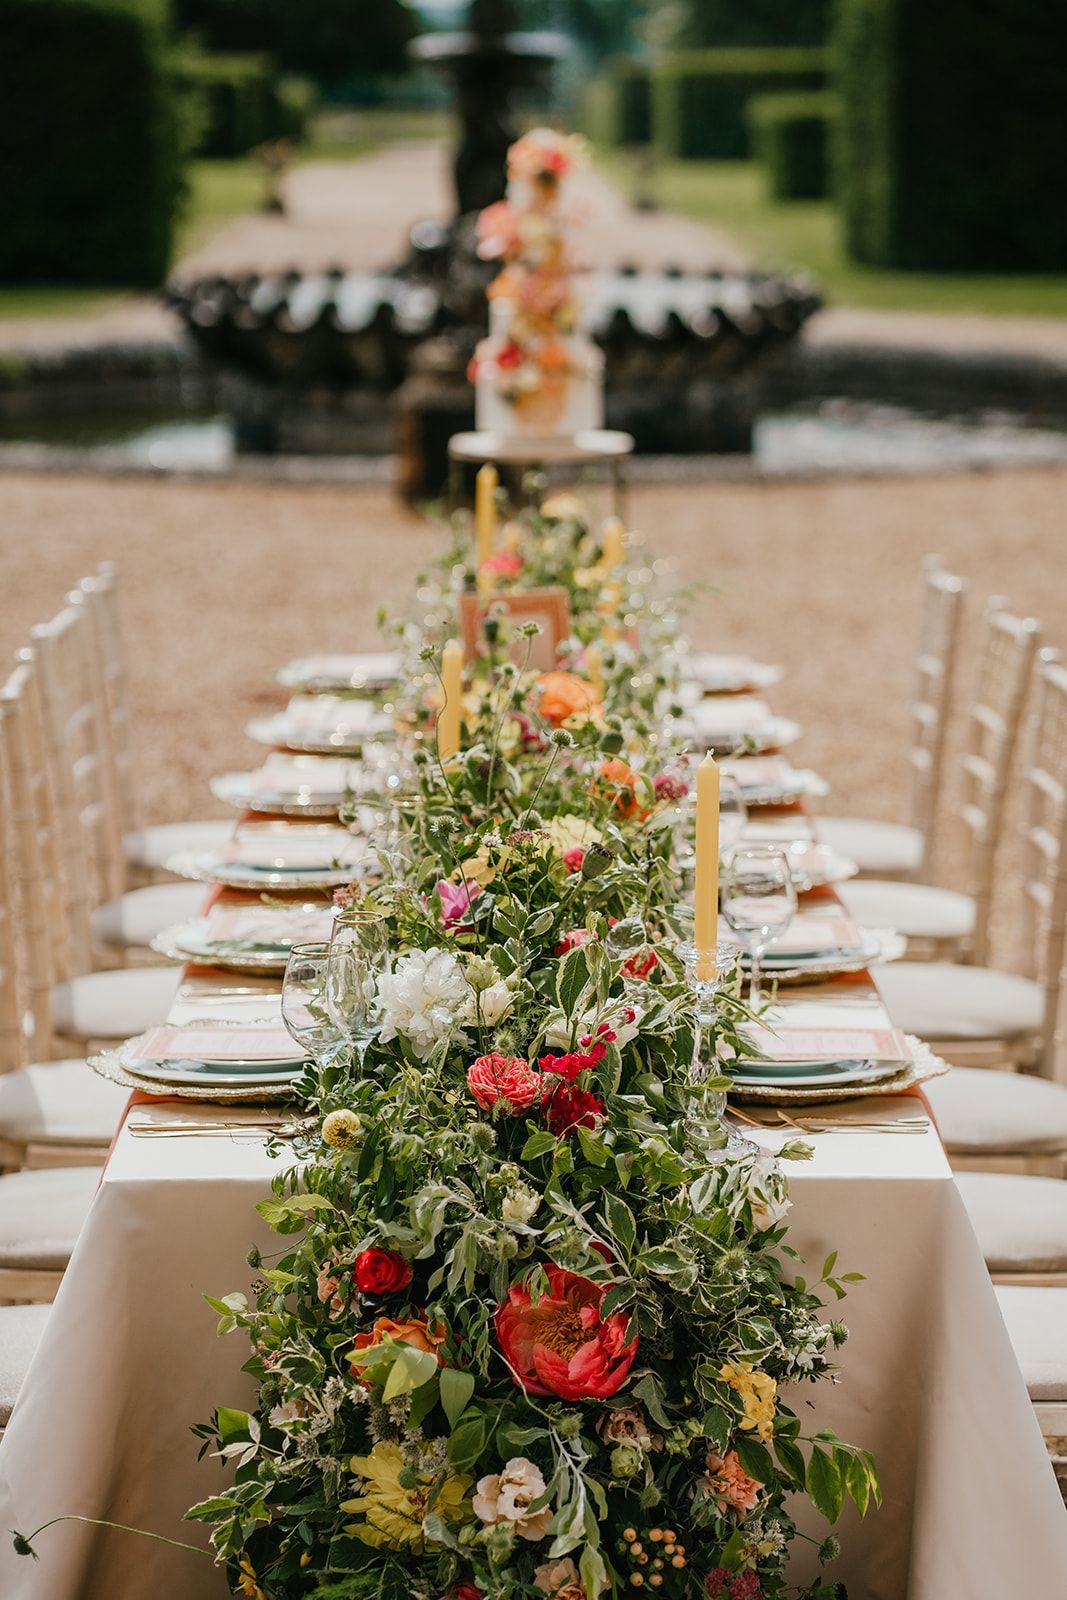 Wedding table set up outside by a fountain with colourful floral runner and wedding cake